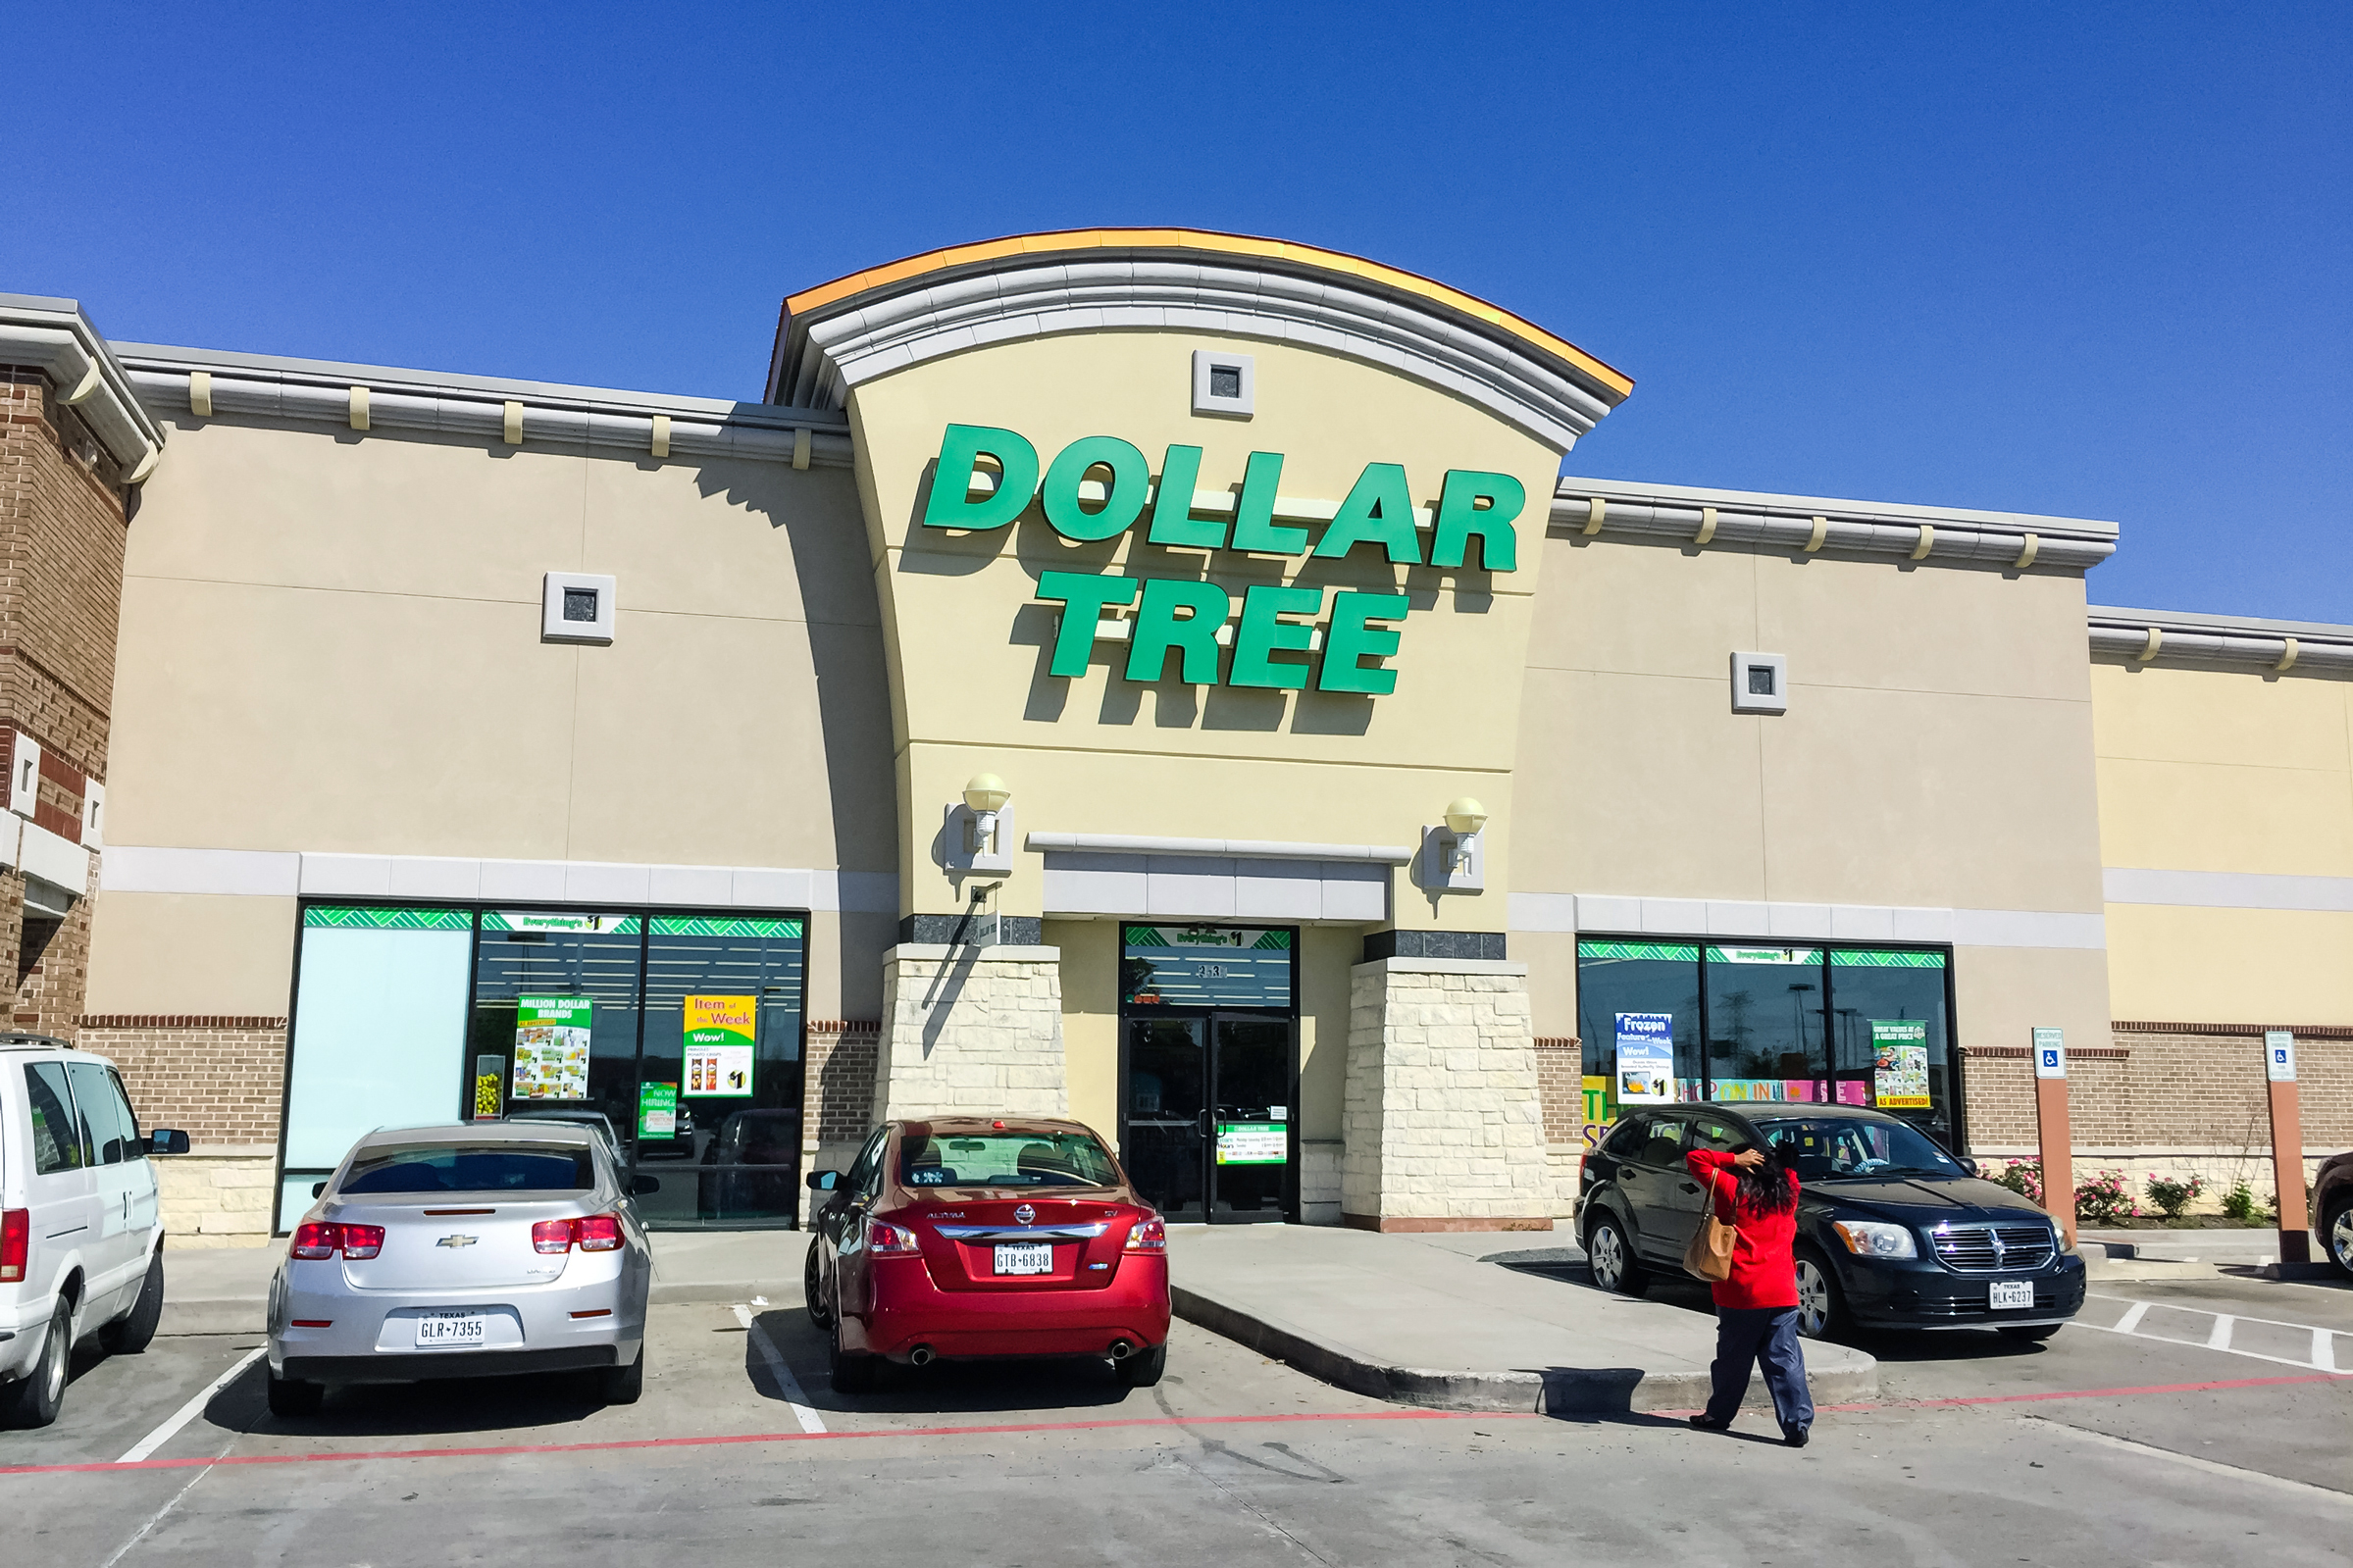 Does Walmart Own Dollar Tree In 2022? (Not What You Think)